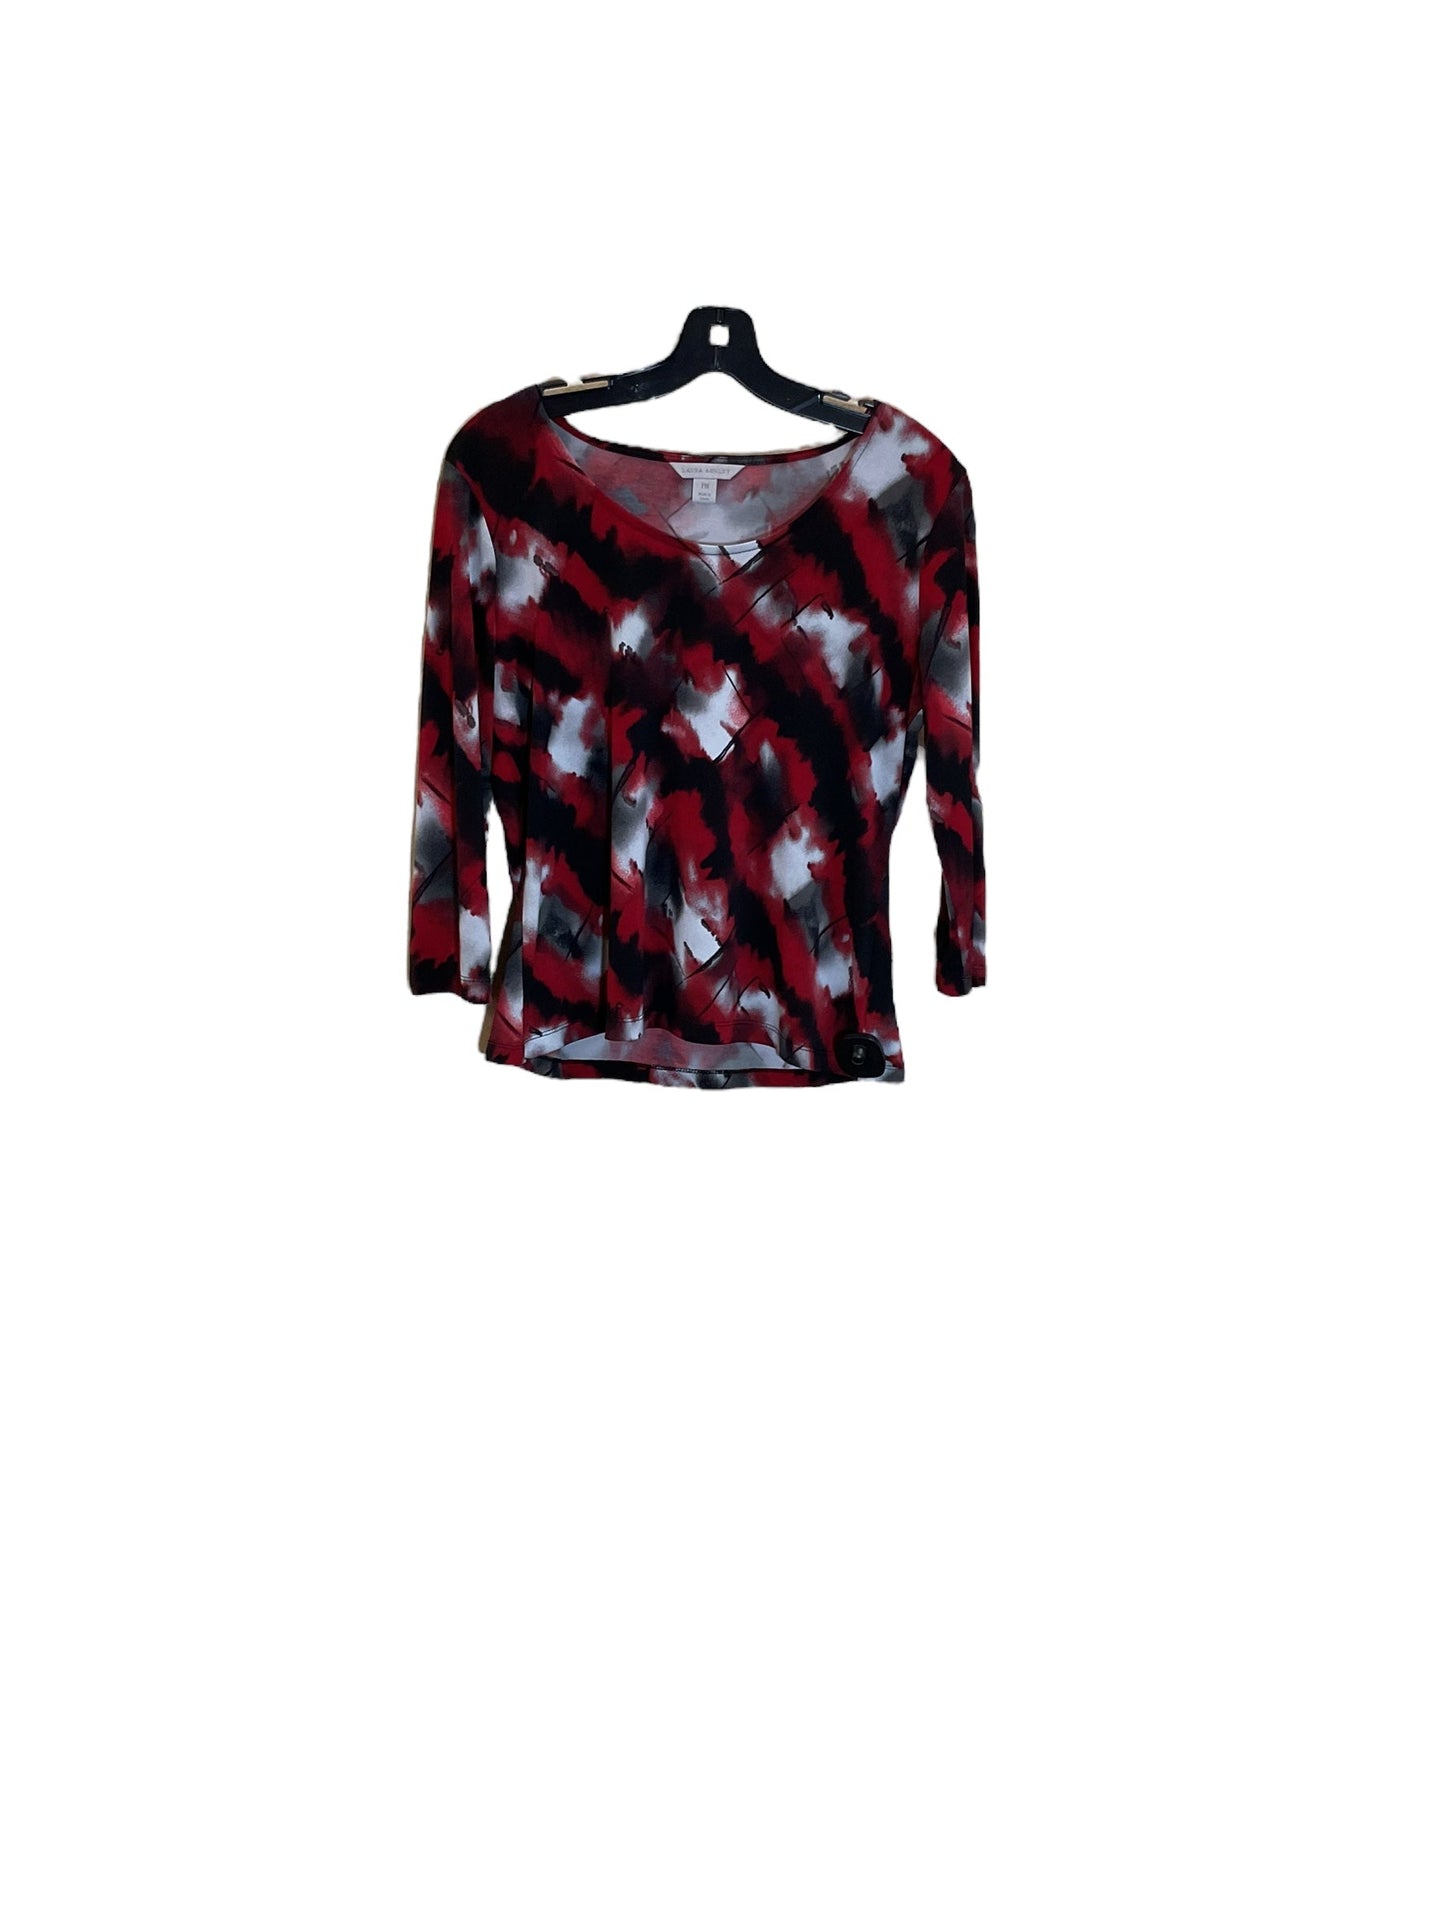 Black & Red Top 3/4 Sleeve Laura Ashley, Size Petite  M